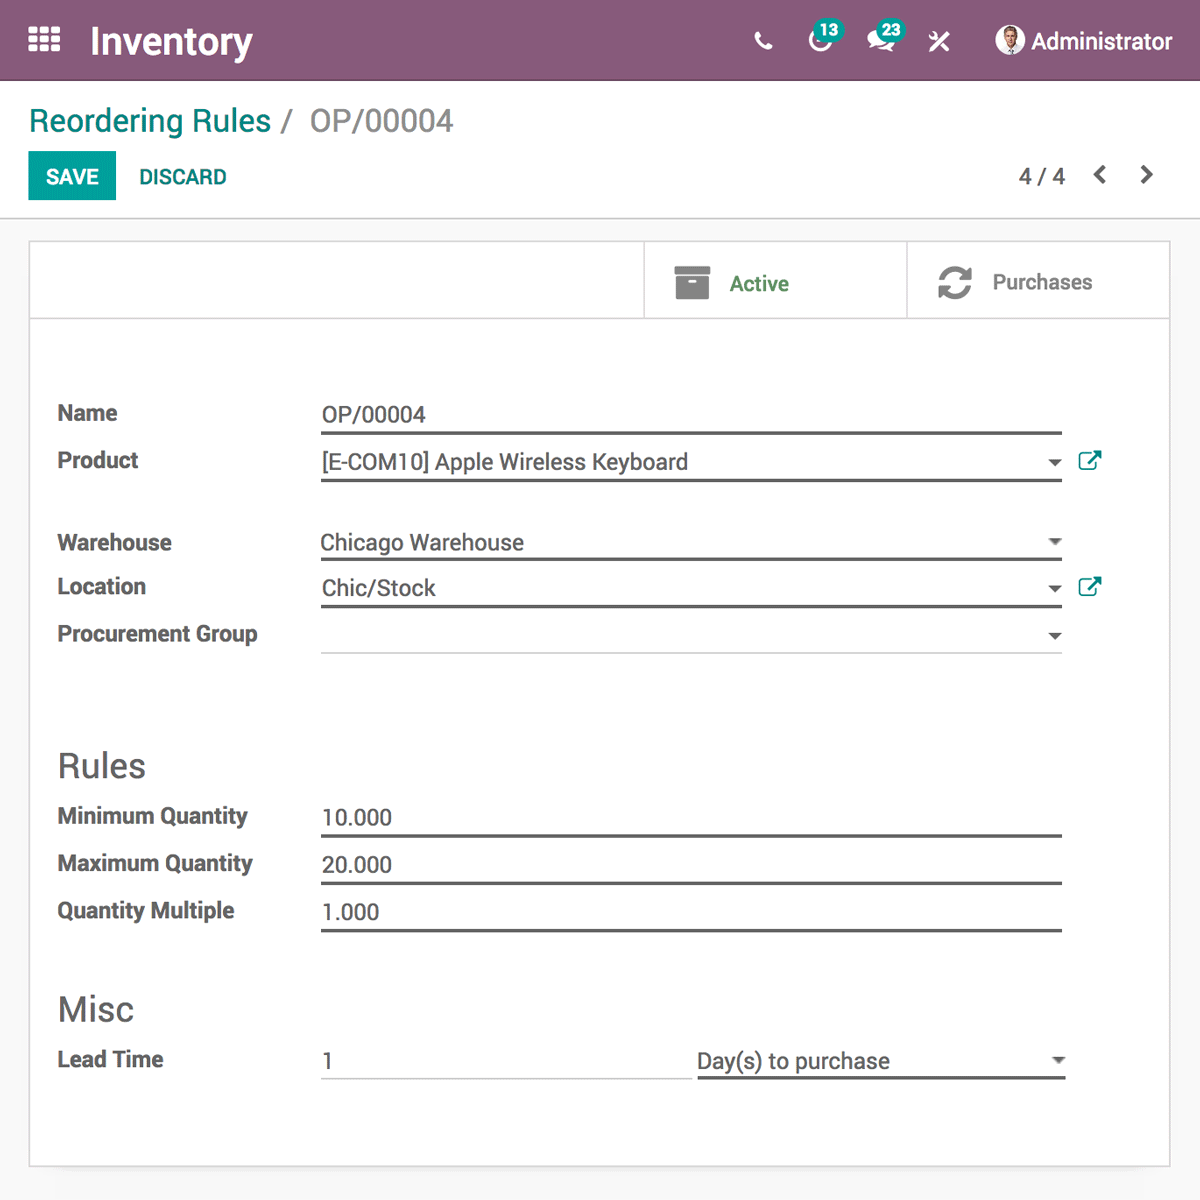 odoo inventory management software